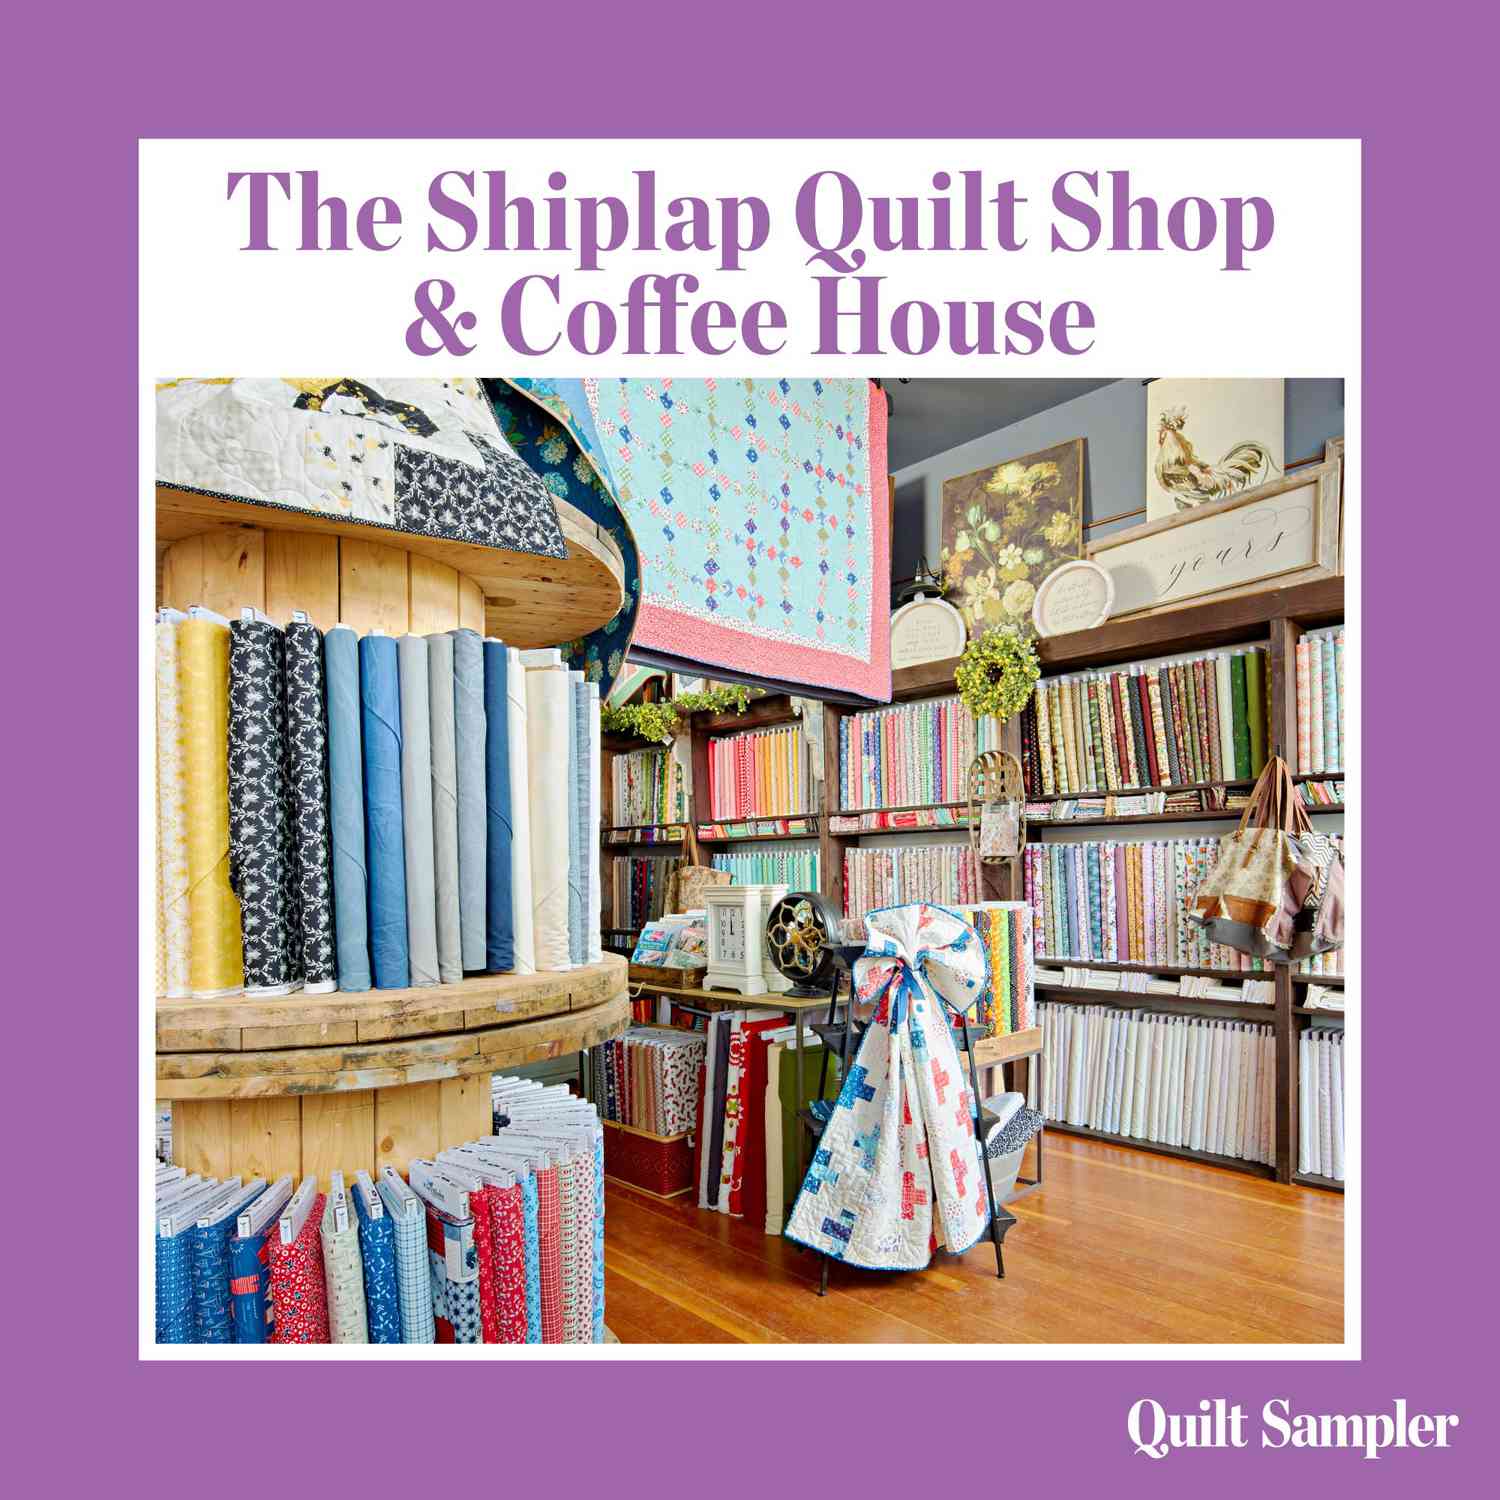 The Shiplap Quilt Shop & Coffee House